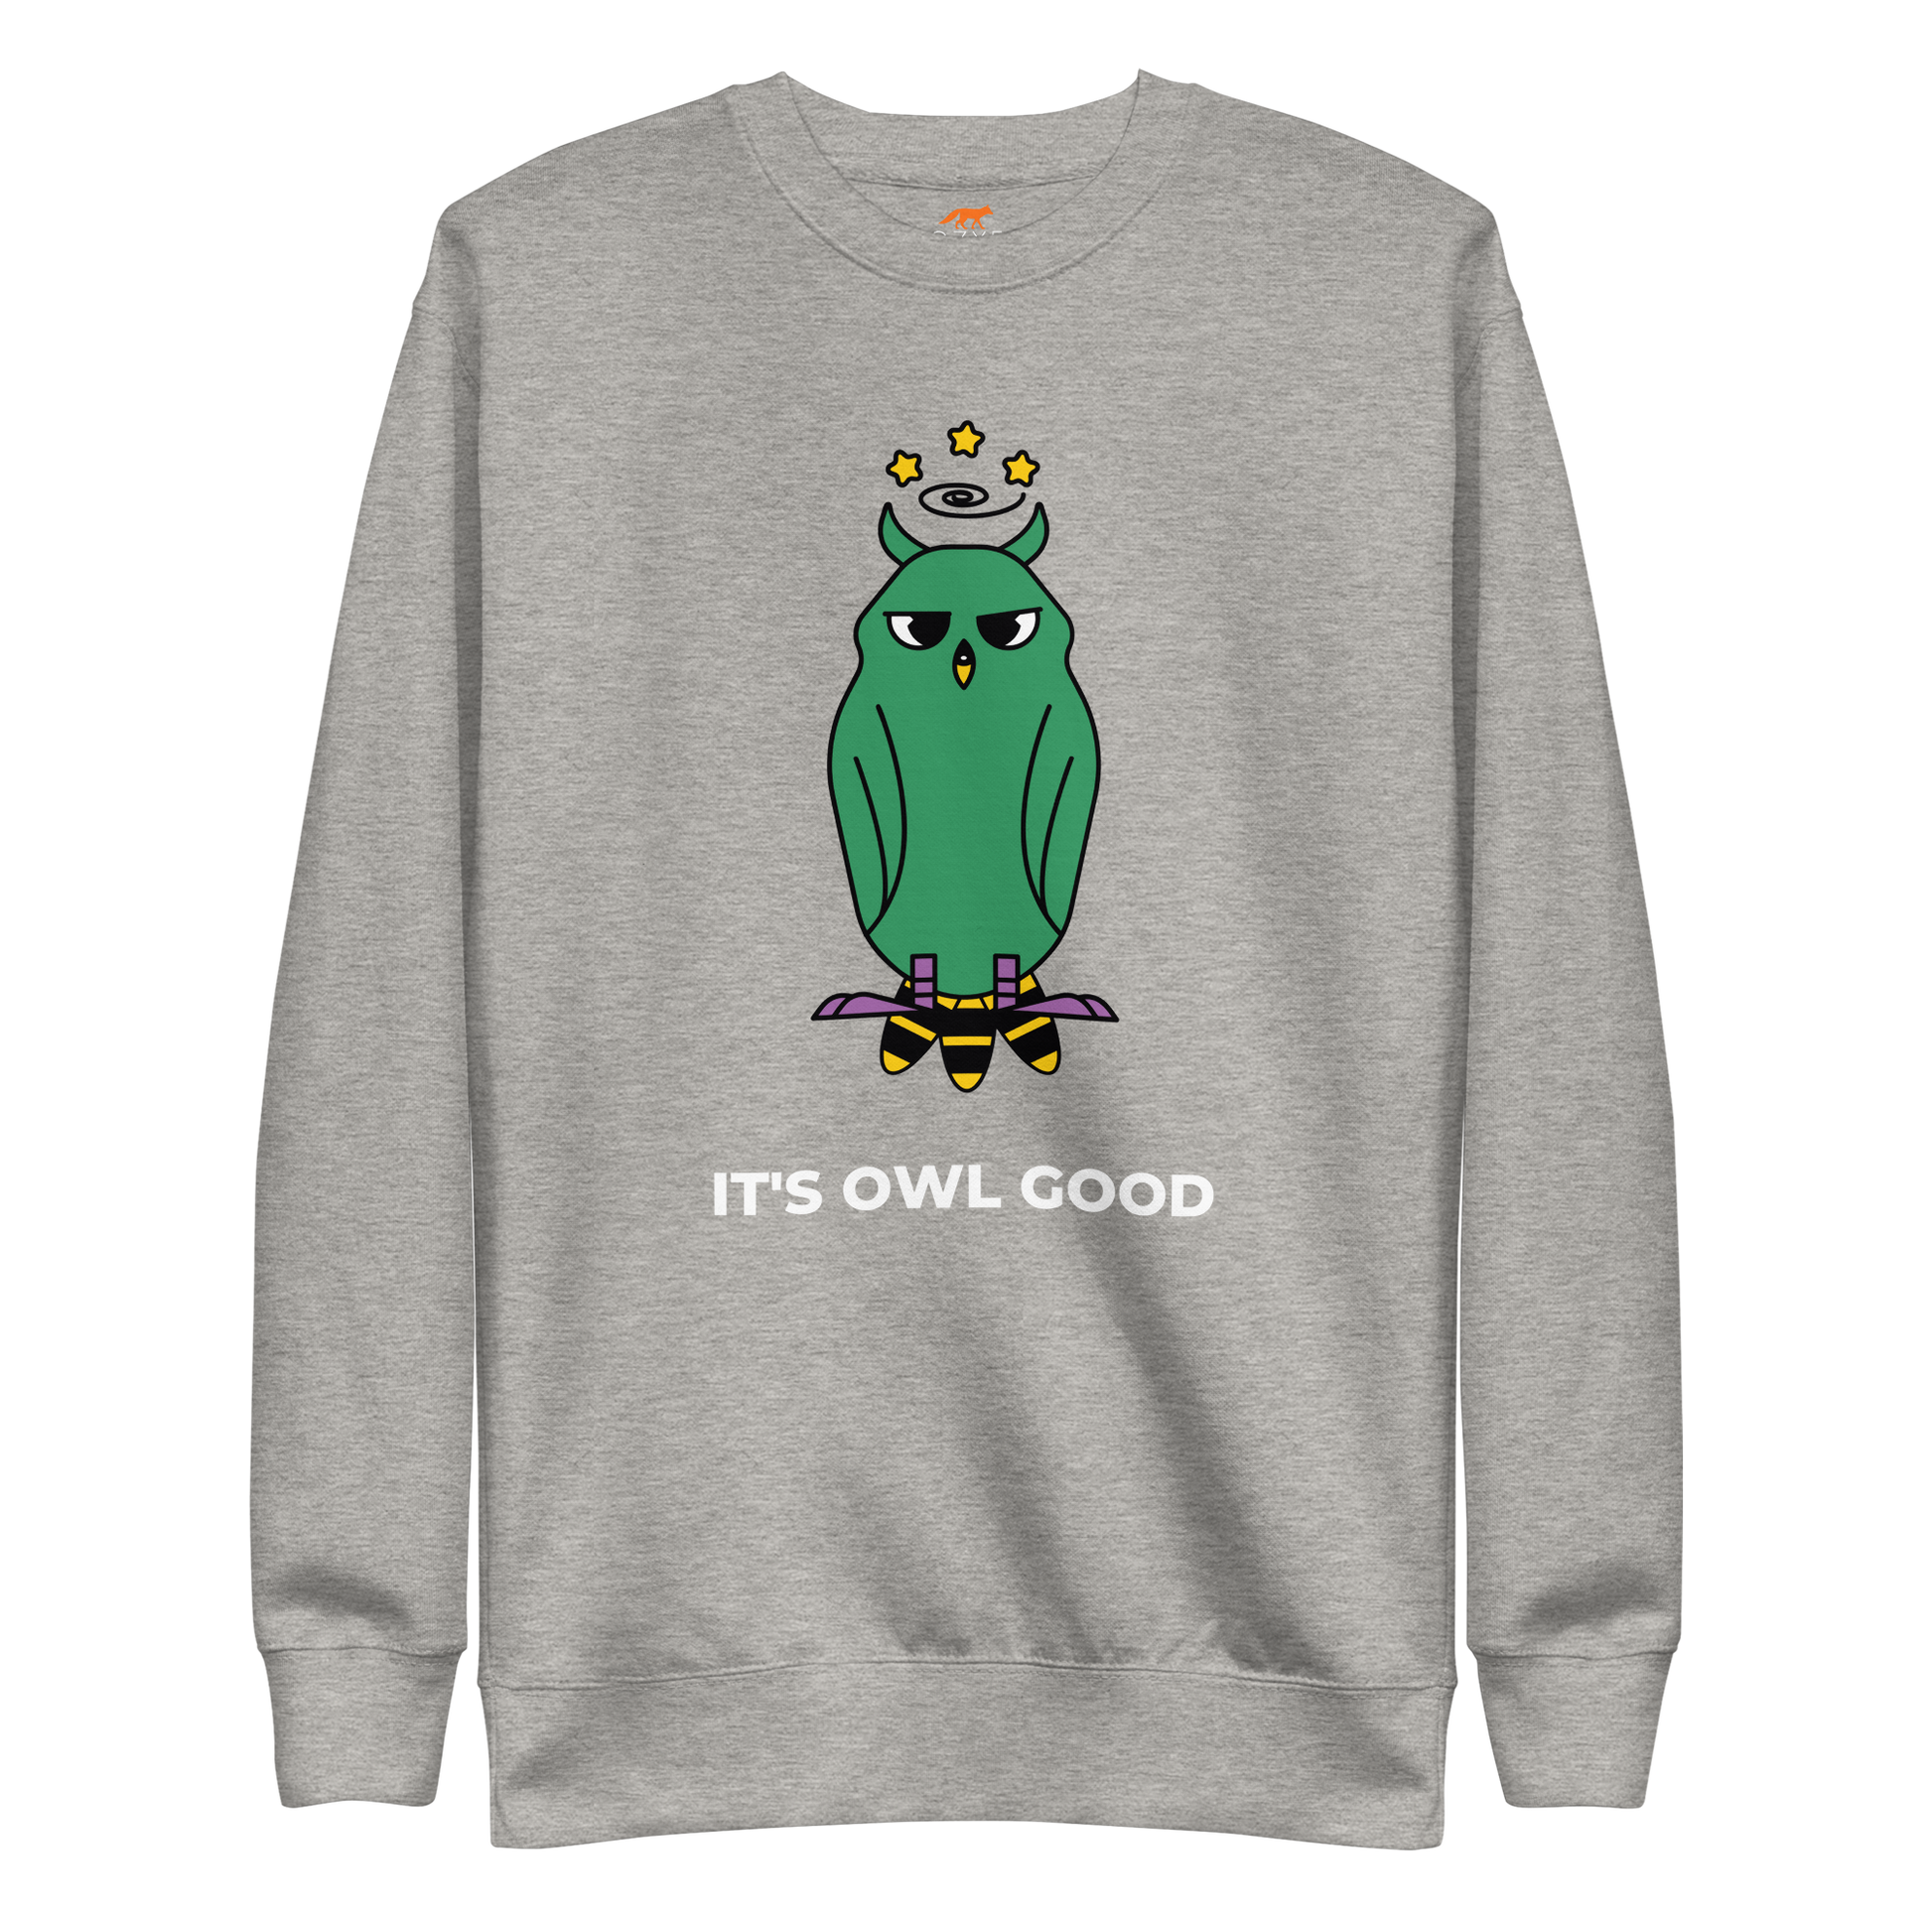 Carbon Grey Premium Owl Sweatshirt featuring a hootin' cool It's Owl Good graphic on the chest - Funny Graphic Owl Sweatshirts - Boozy Fox